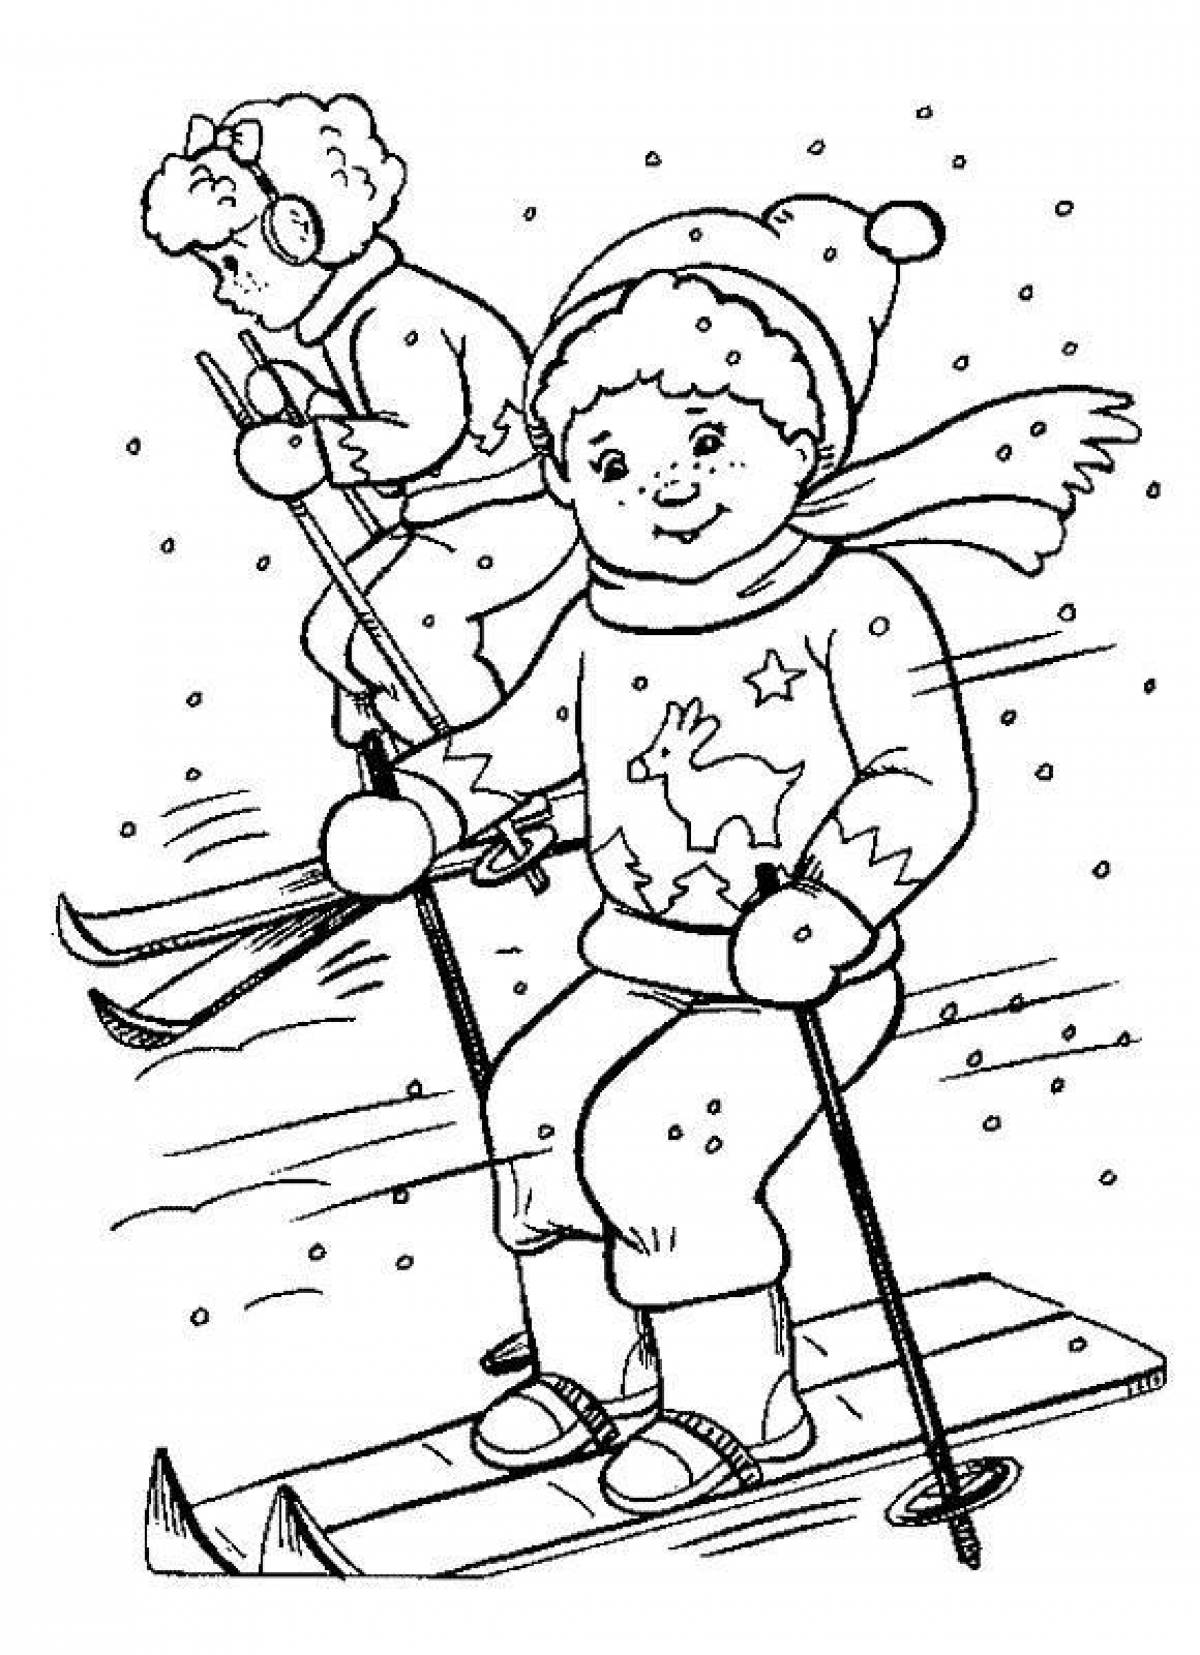 Coloring live skier